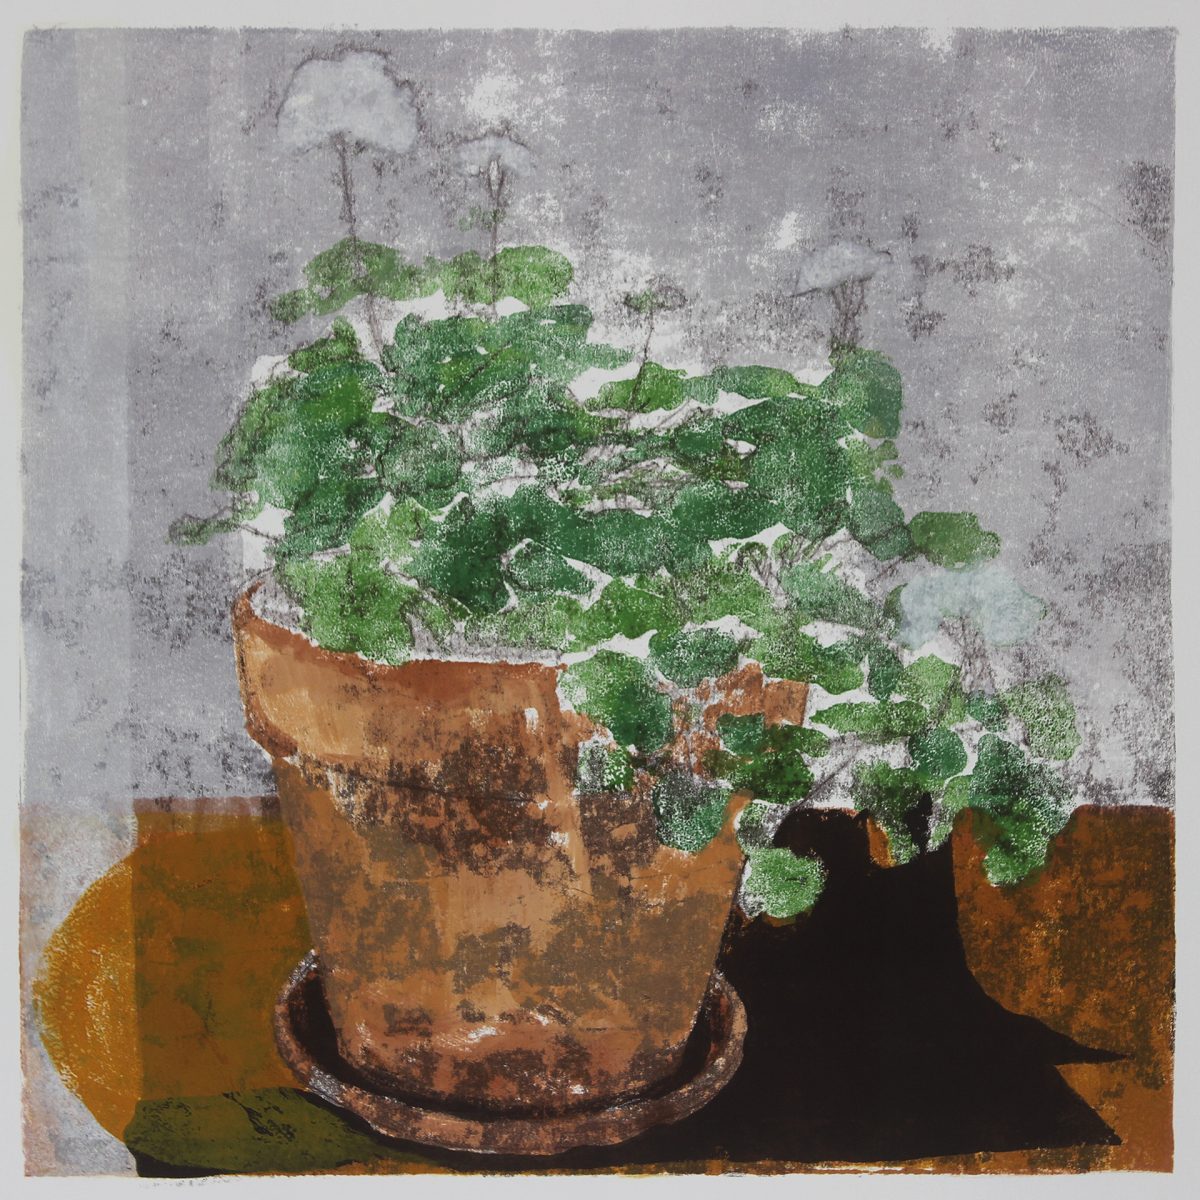 A painting of a green plant in a pot.